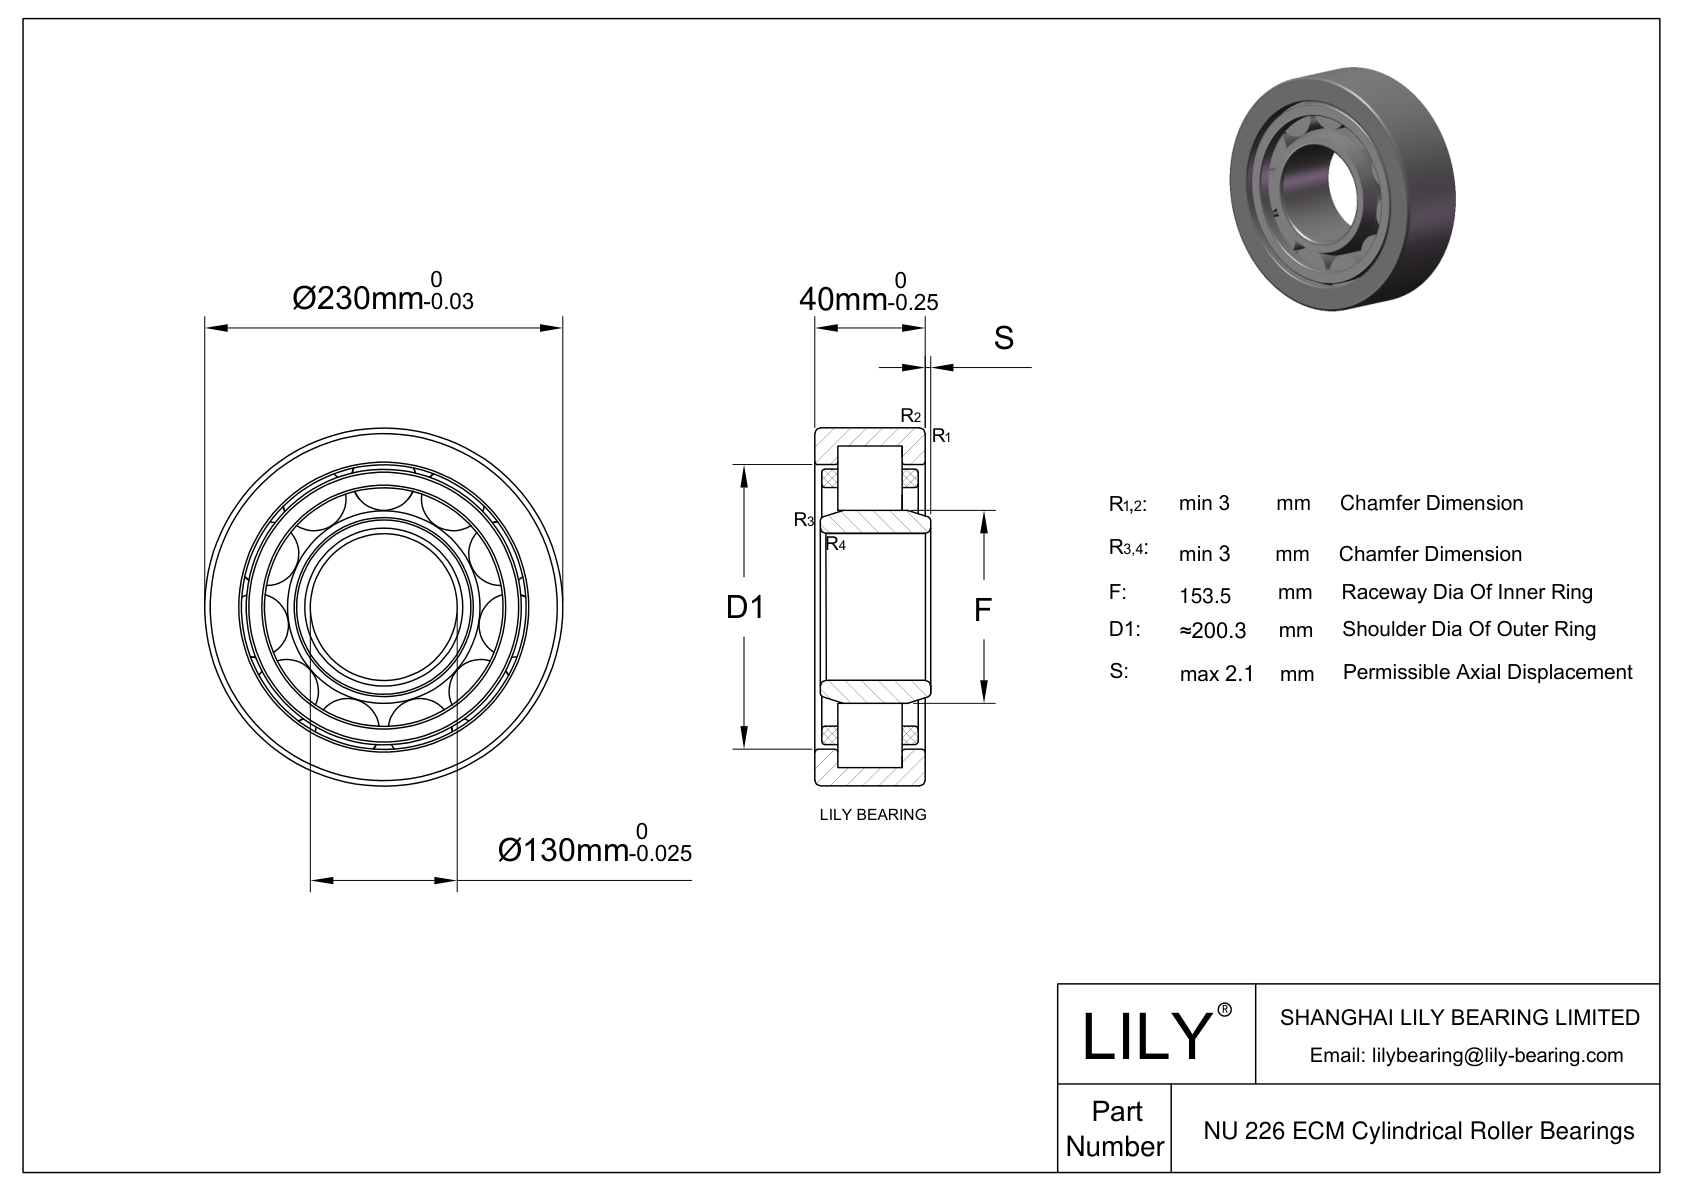 NU 226 ECM/C3VL2071 Ceramic Coated Cylindrical Roller Bearings cad drawing